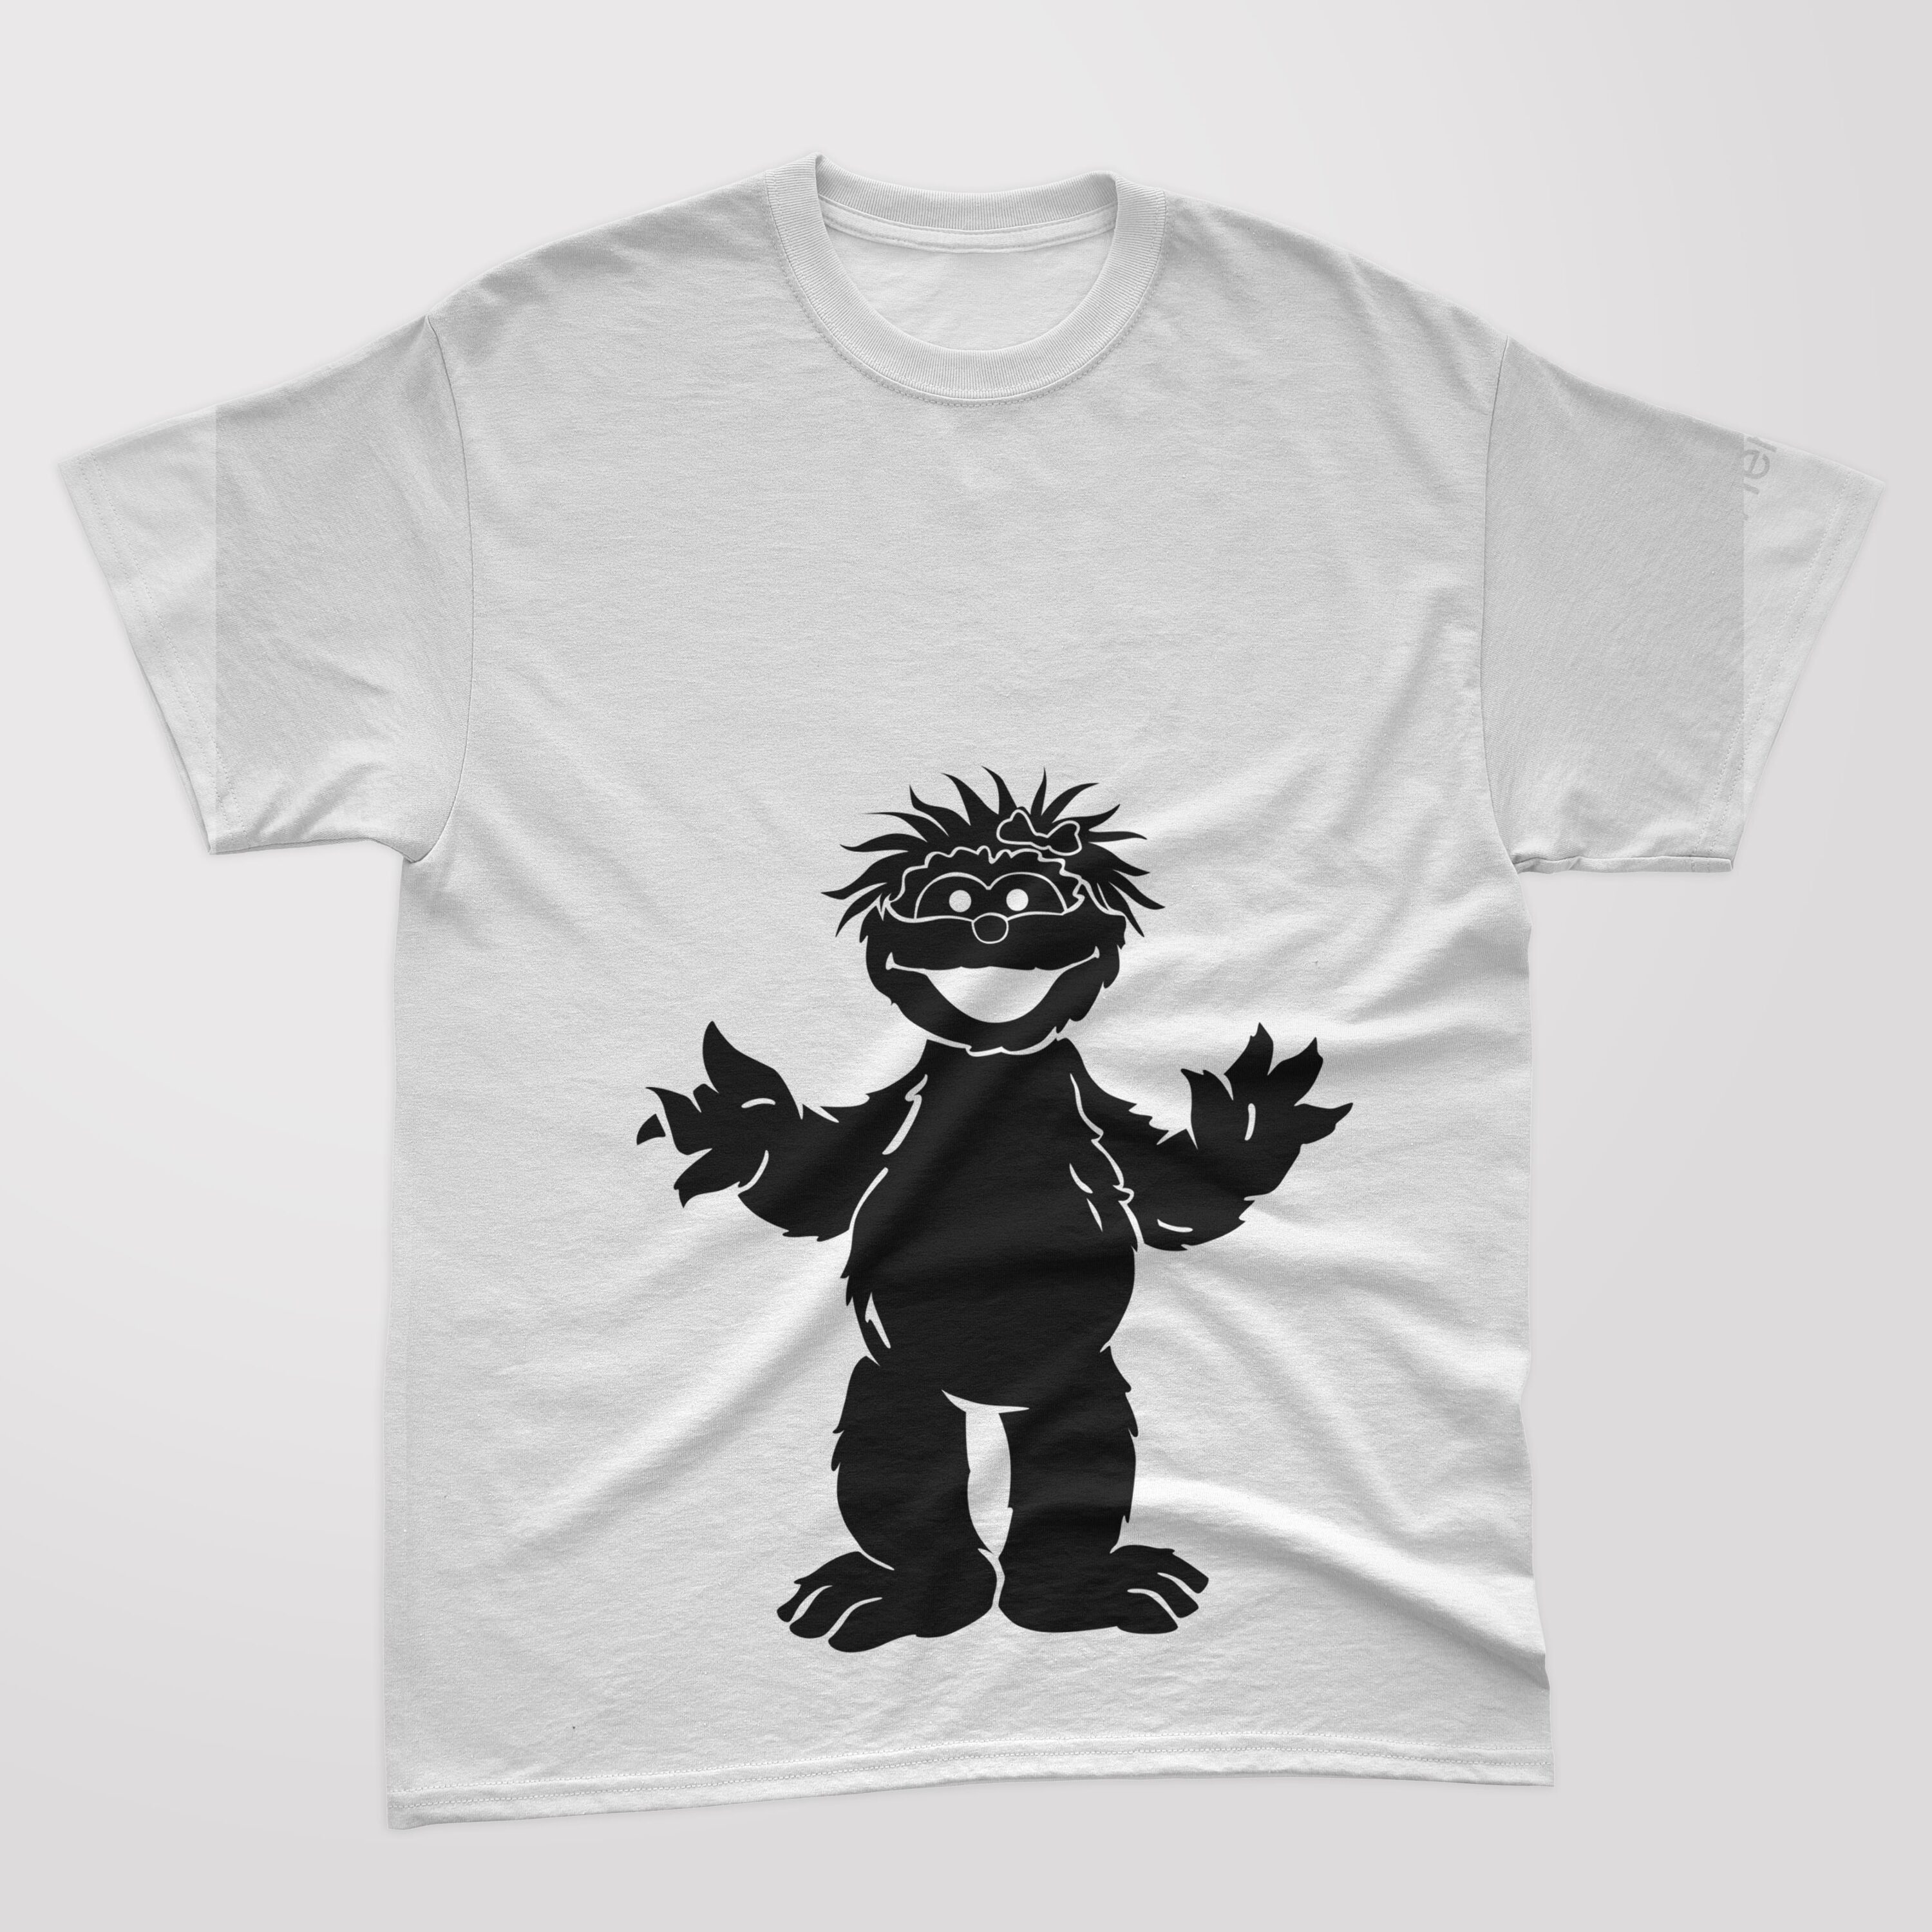 A white t-shirt with a black silhouette funny cookie monster.